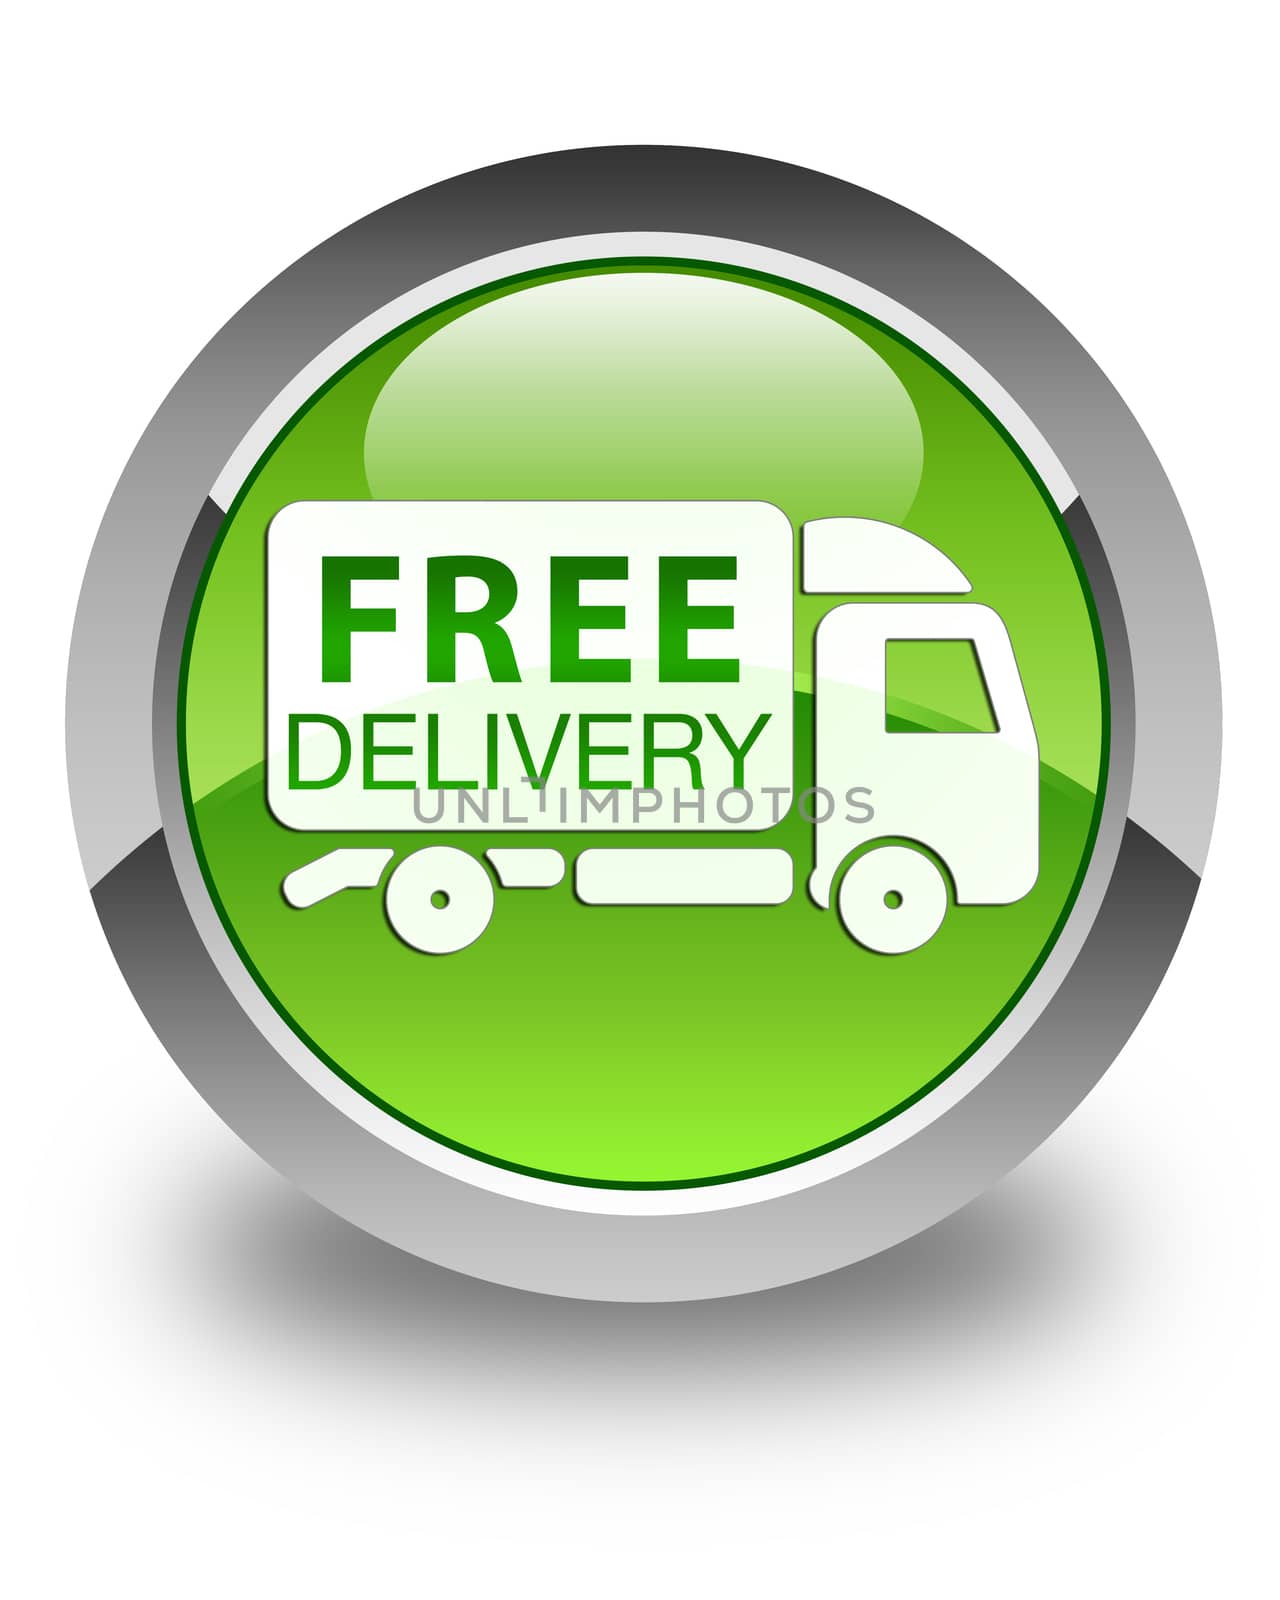 Free delivery (truck icon) on glossy green round button